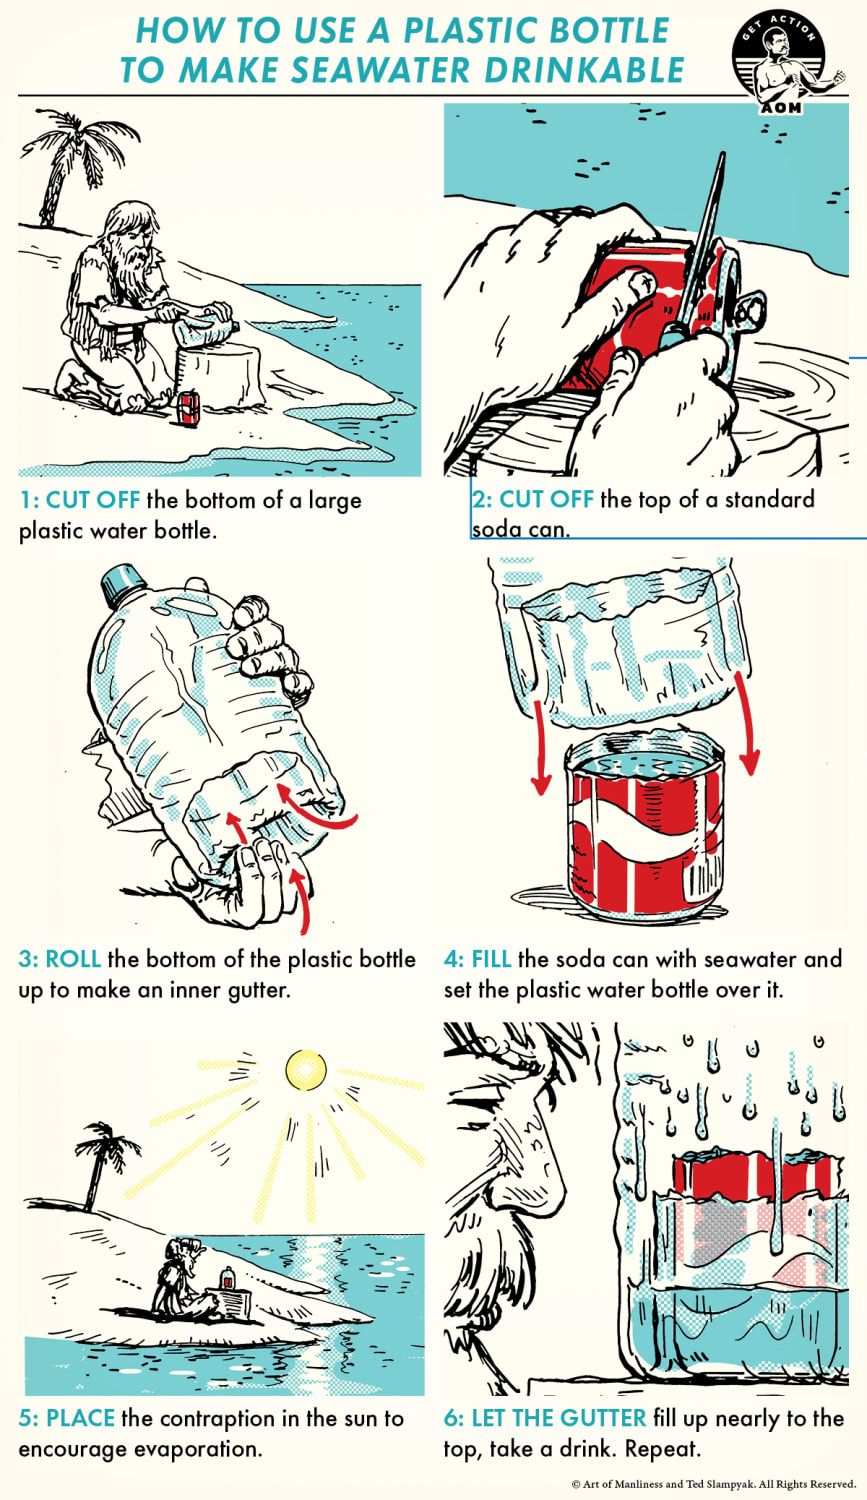 How to turn ocean water into drinkable water using a can and plastic bottle. Not recommended unless you've found your self at a real pinch